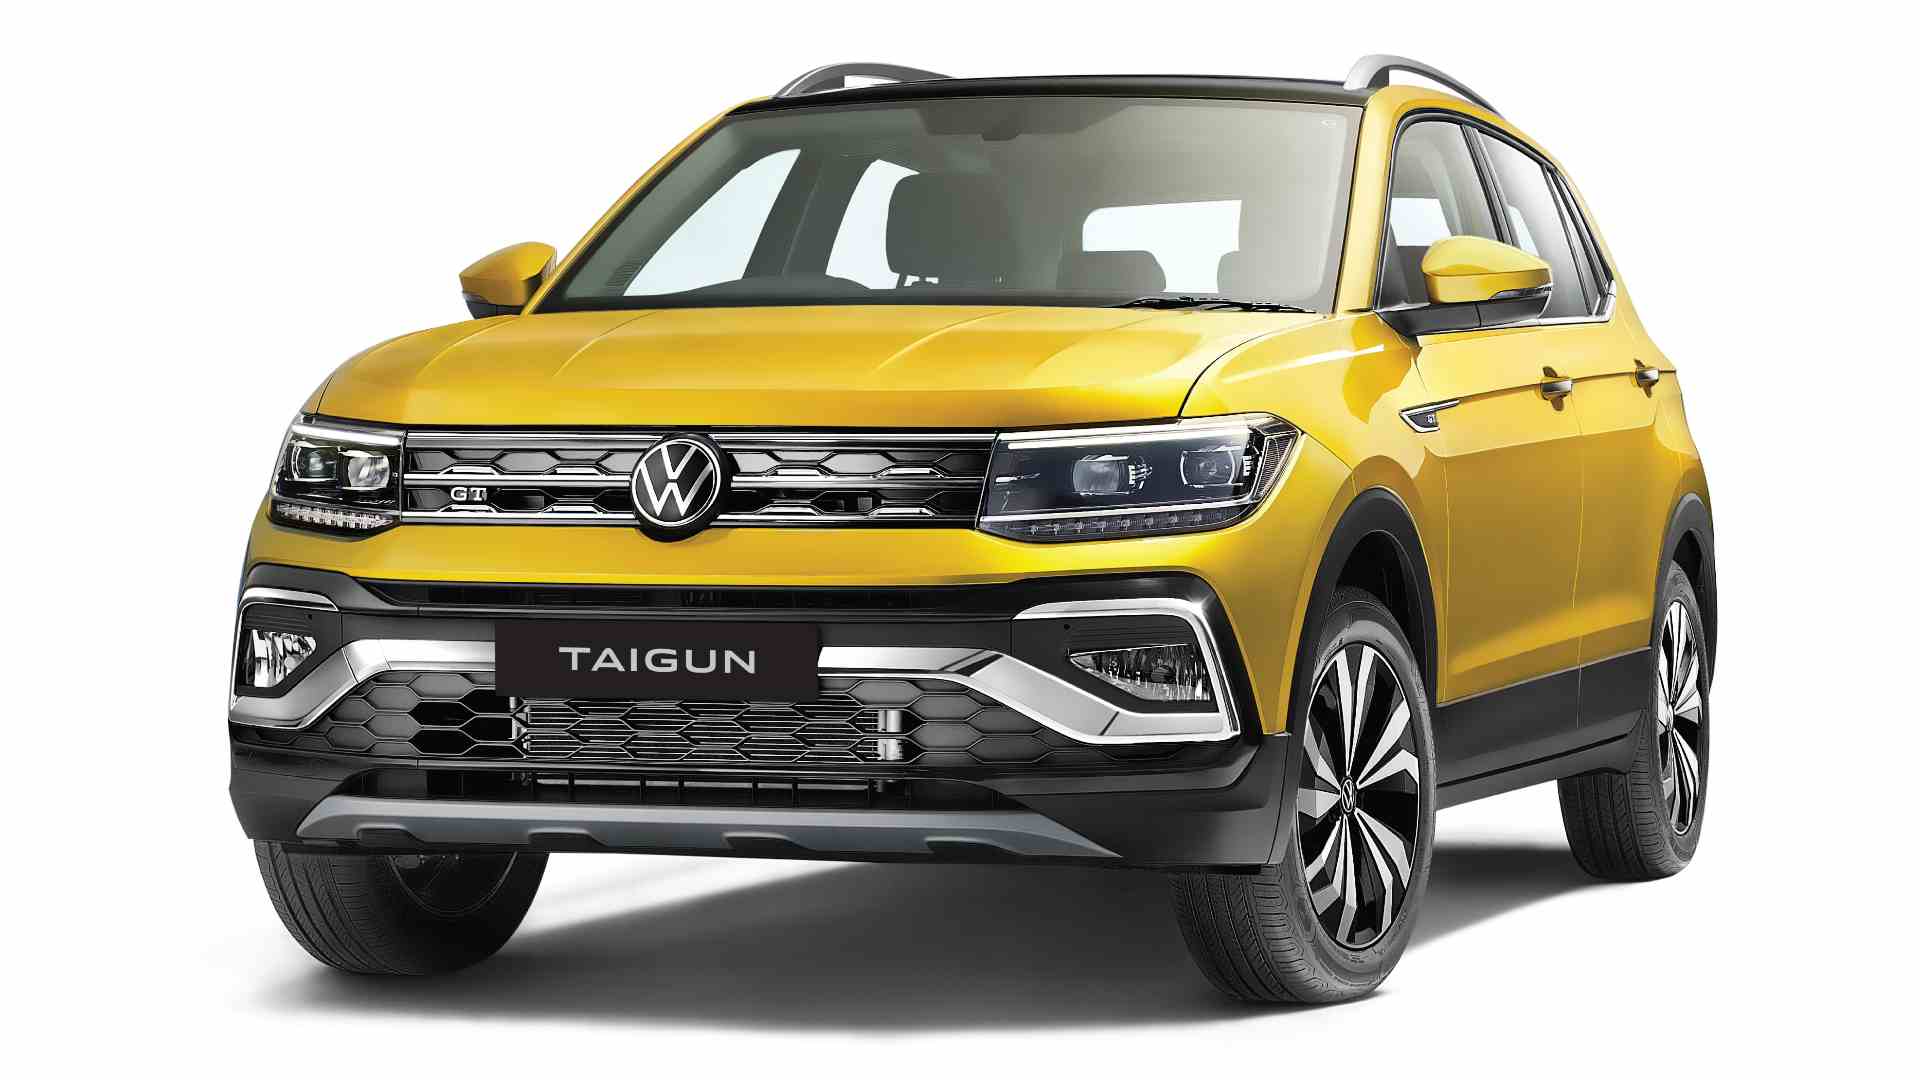 The production-spec Volkswagen Taigun remains largely identical to the concept shown in 2020. Image: Volkswagen